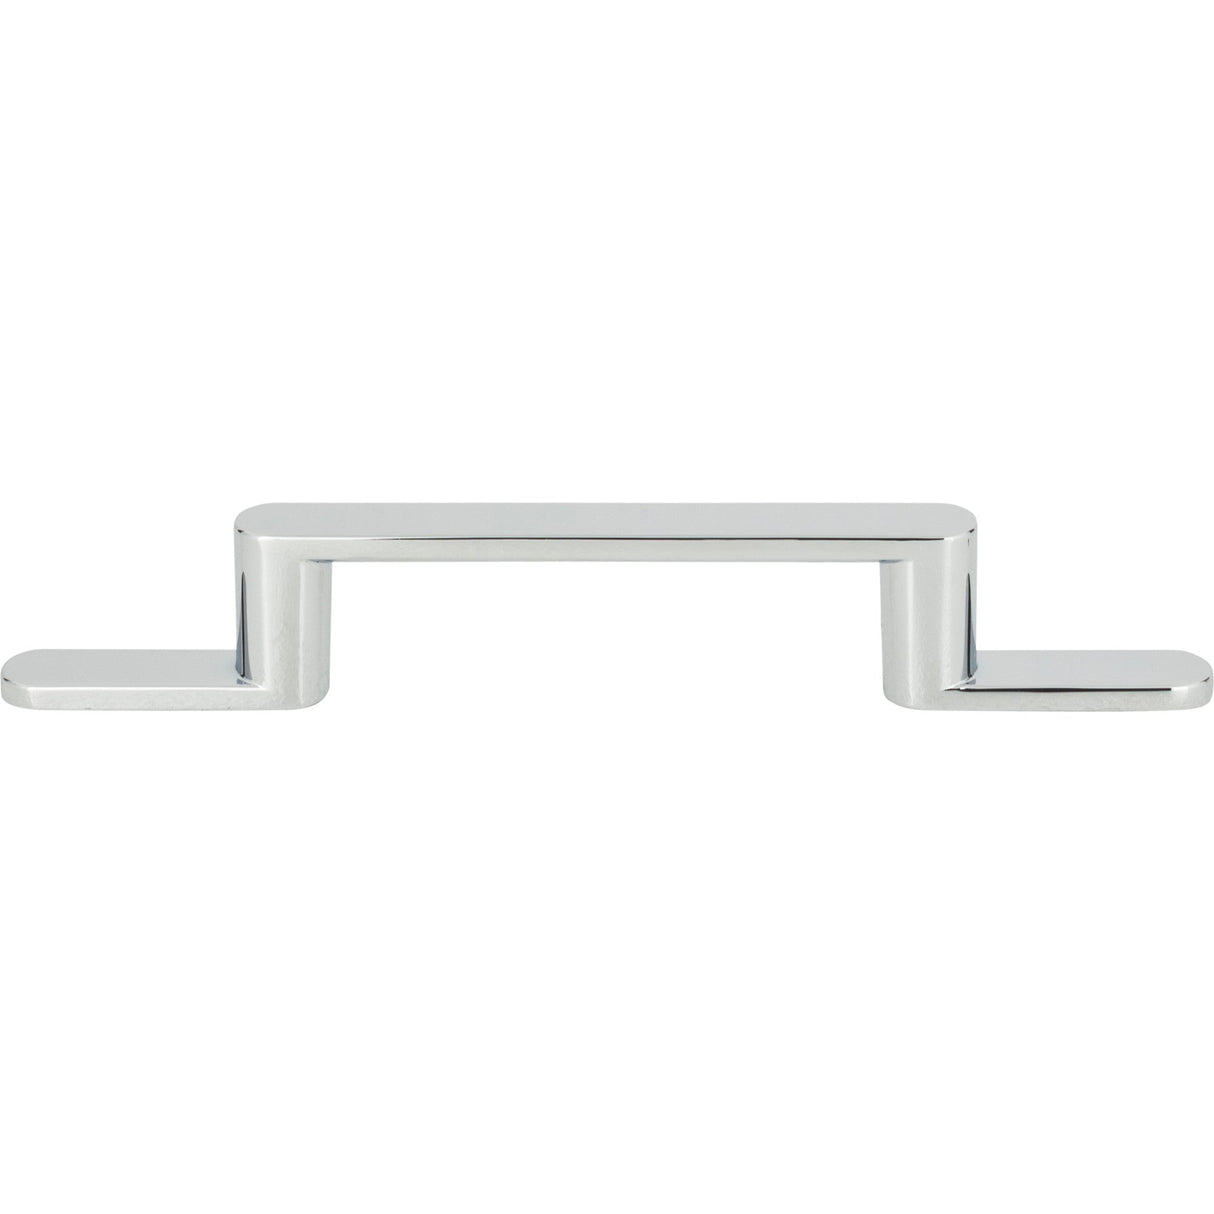 Atlas Homewares Alaire Pull 3 3/4 Inch (c-c) Polished Chrome